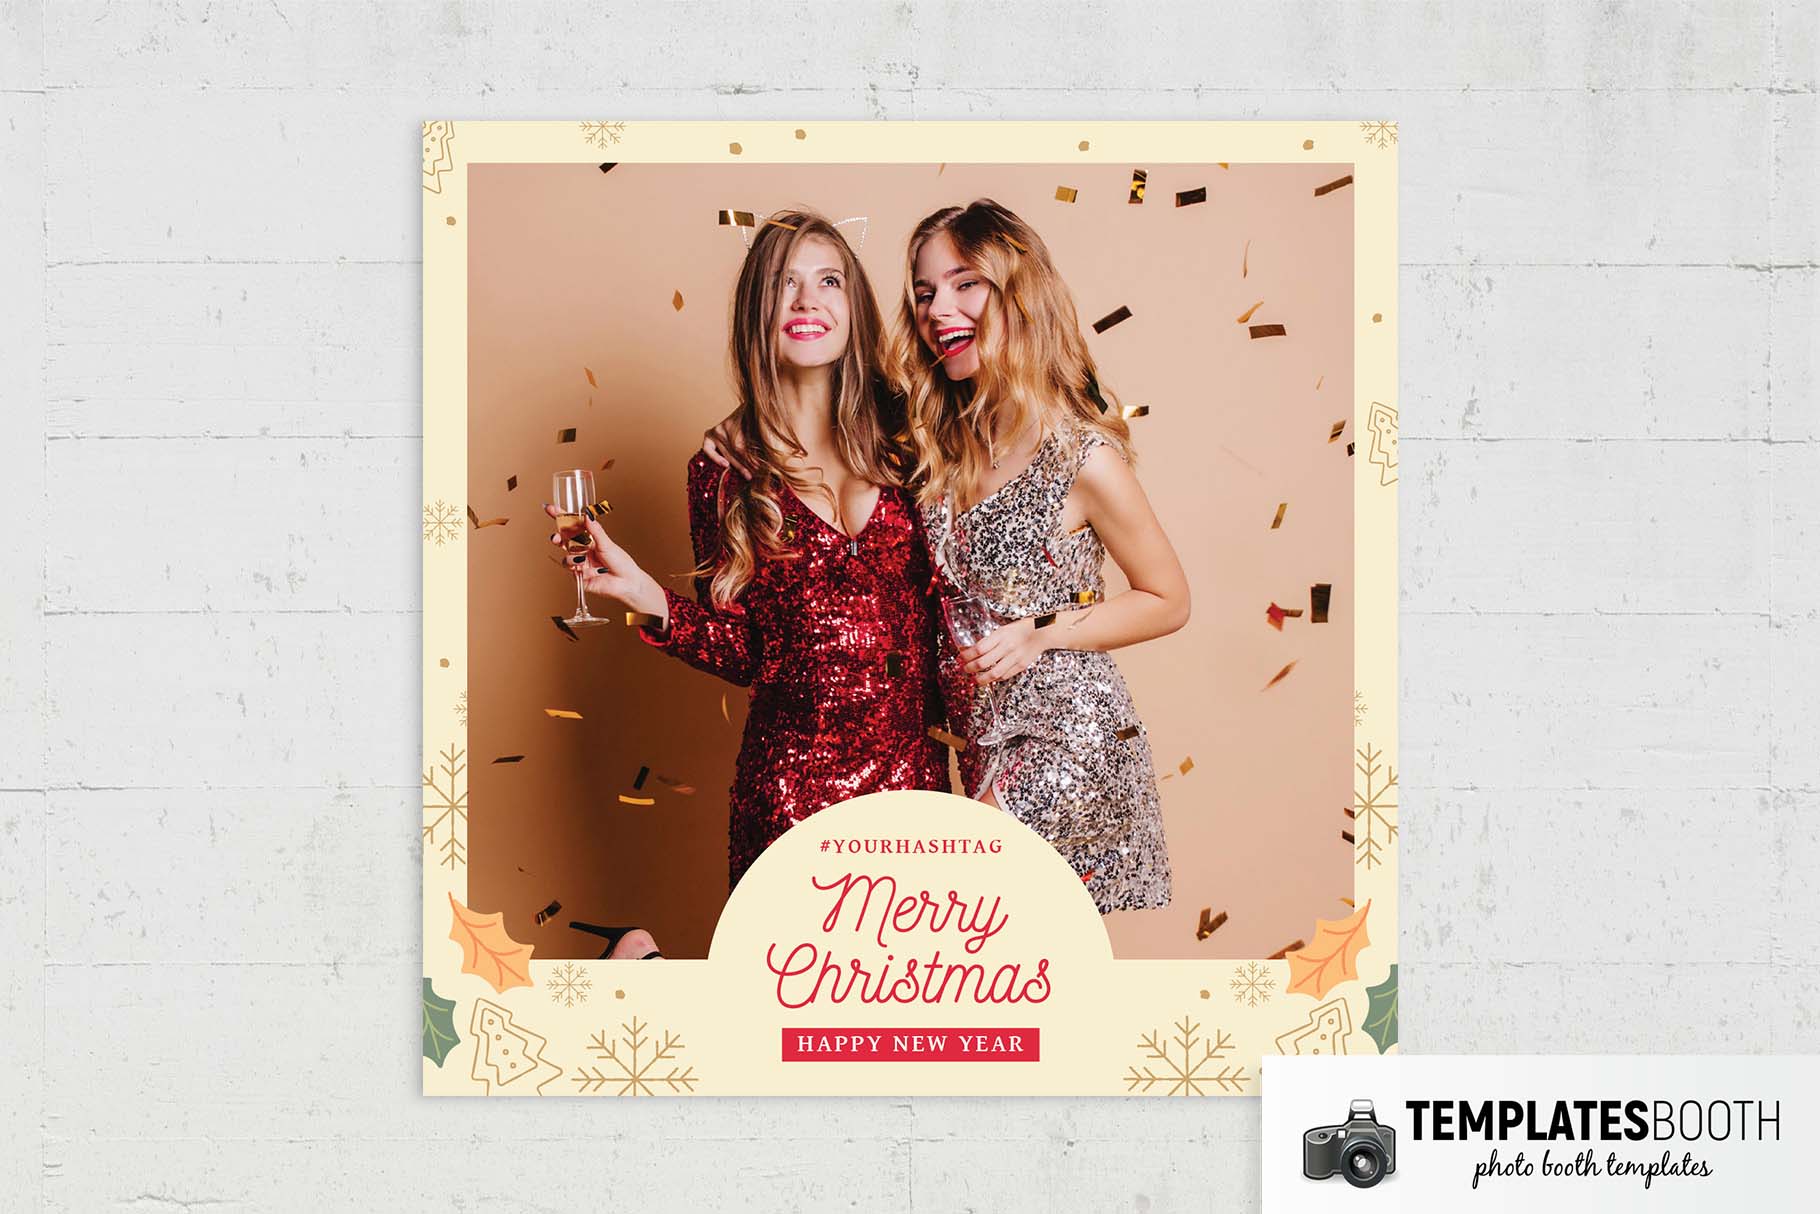 Christmas Party Photo Booth Template